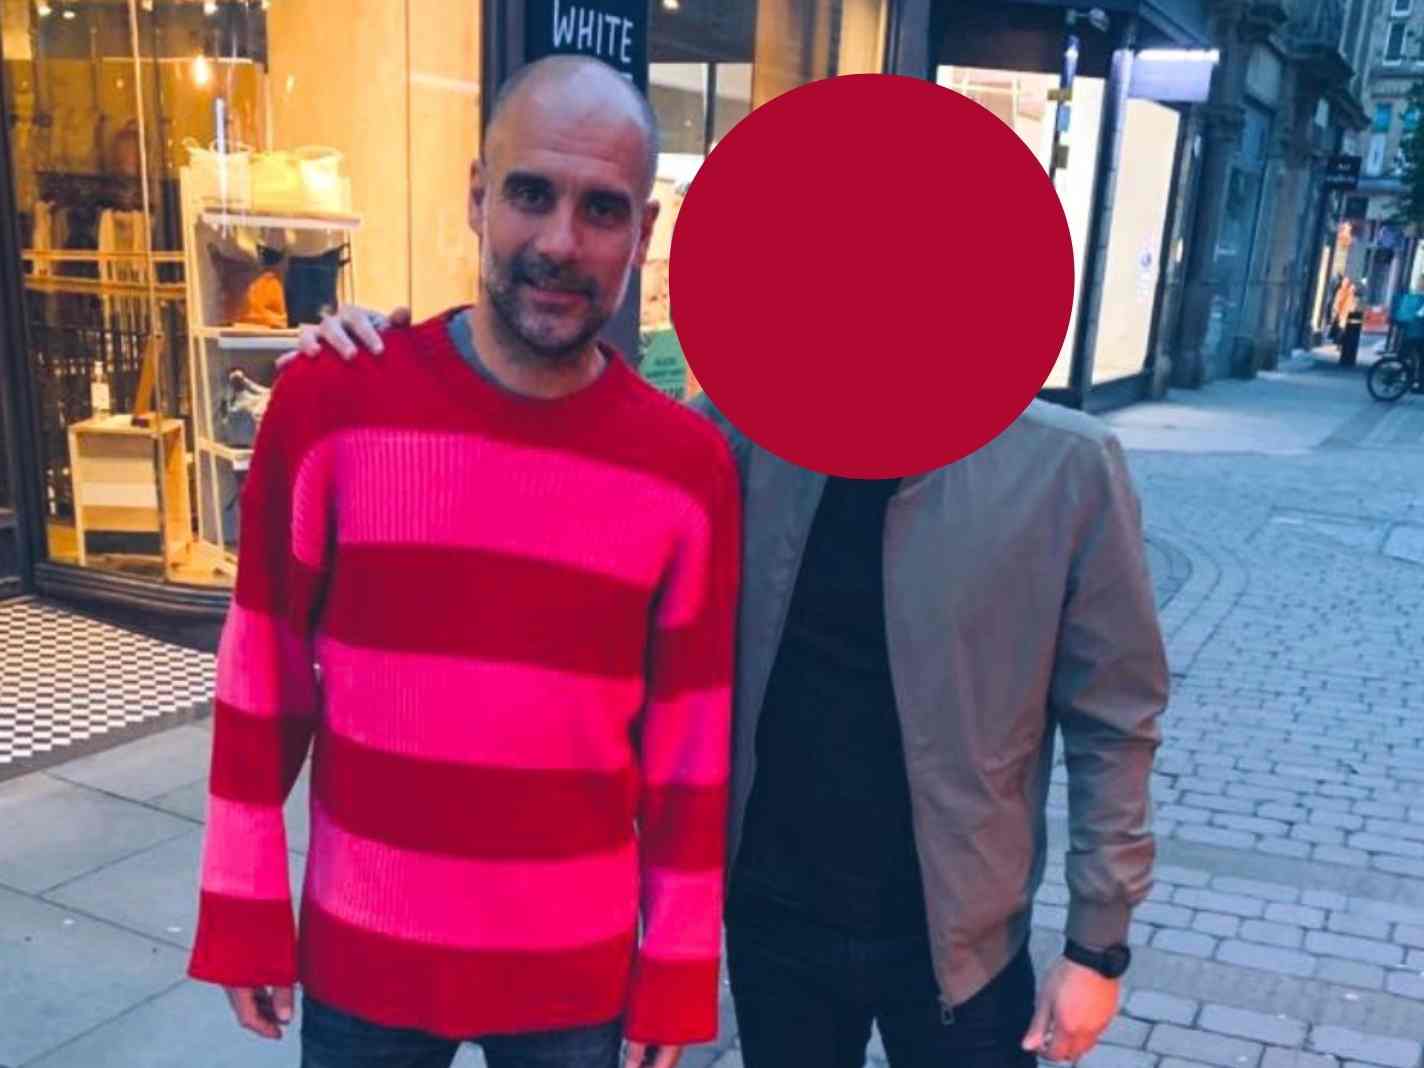 Pep Guardiola wears risky Balenciaga sweater for night out in Manchester – Here’s what it costs